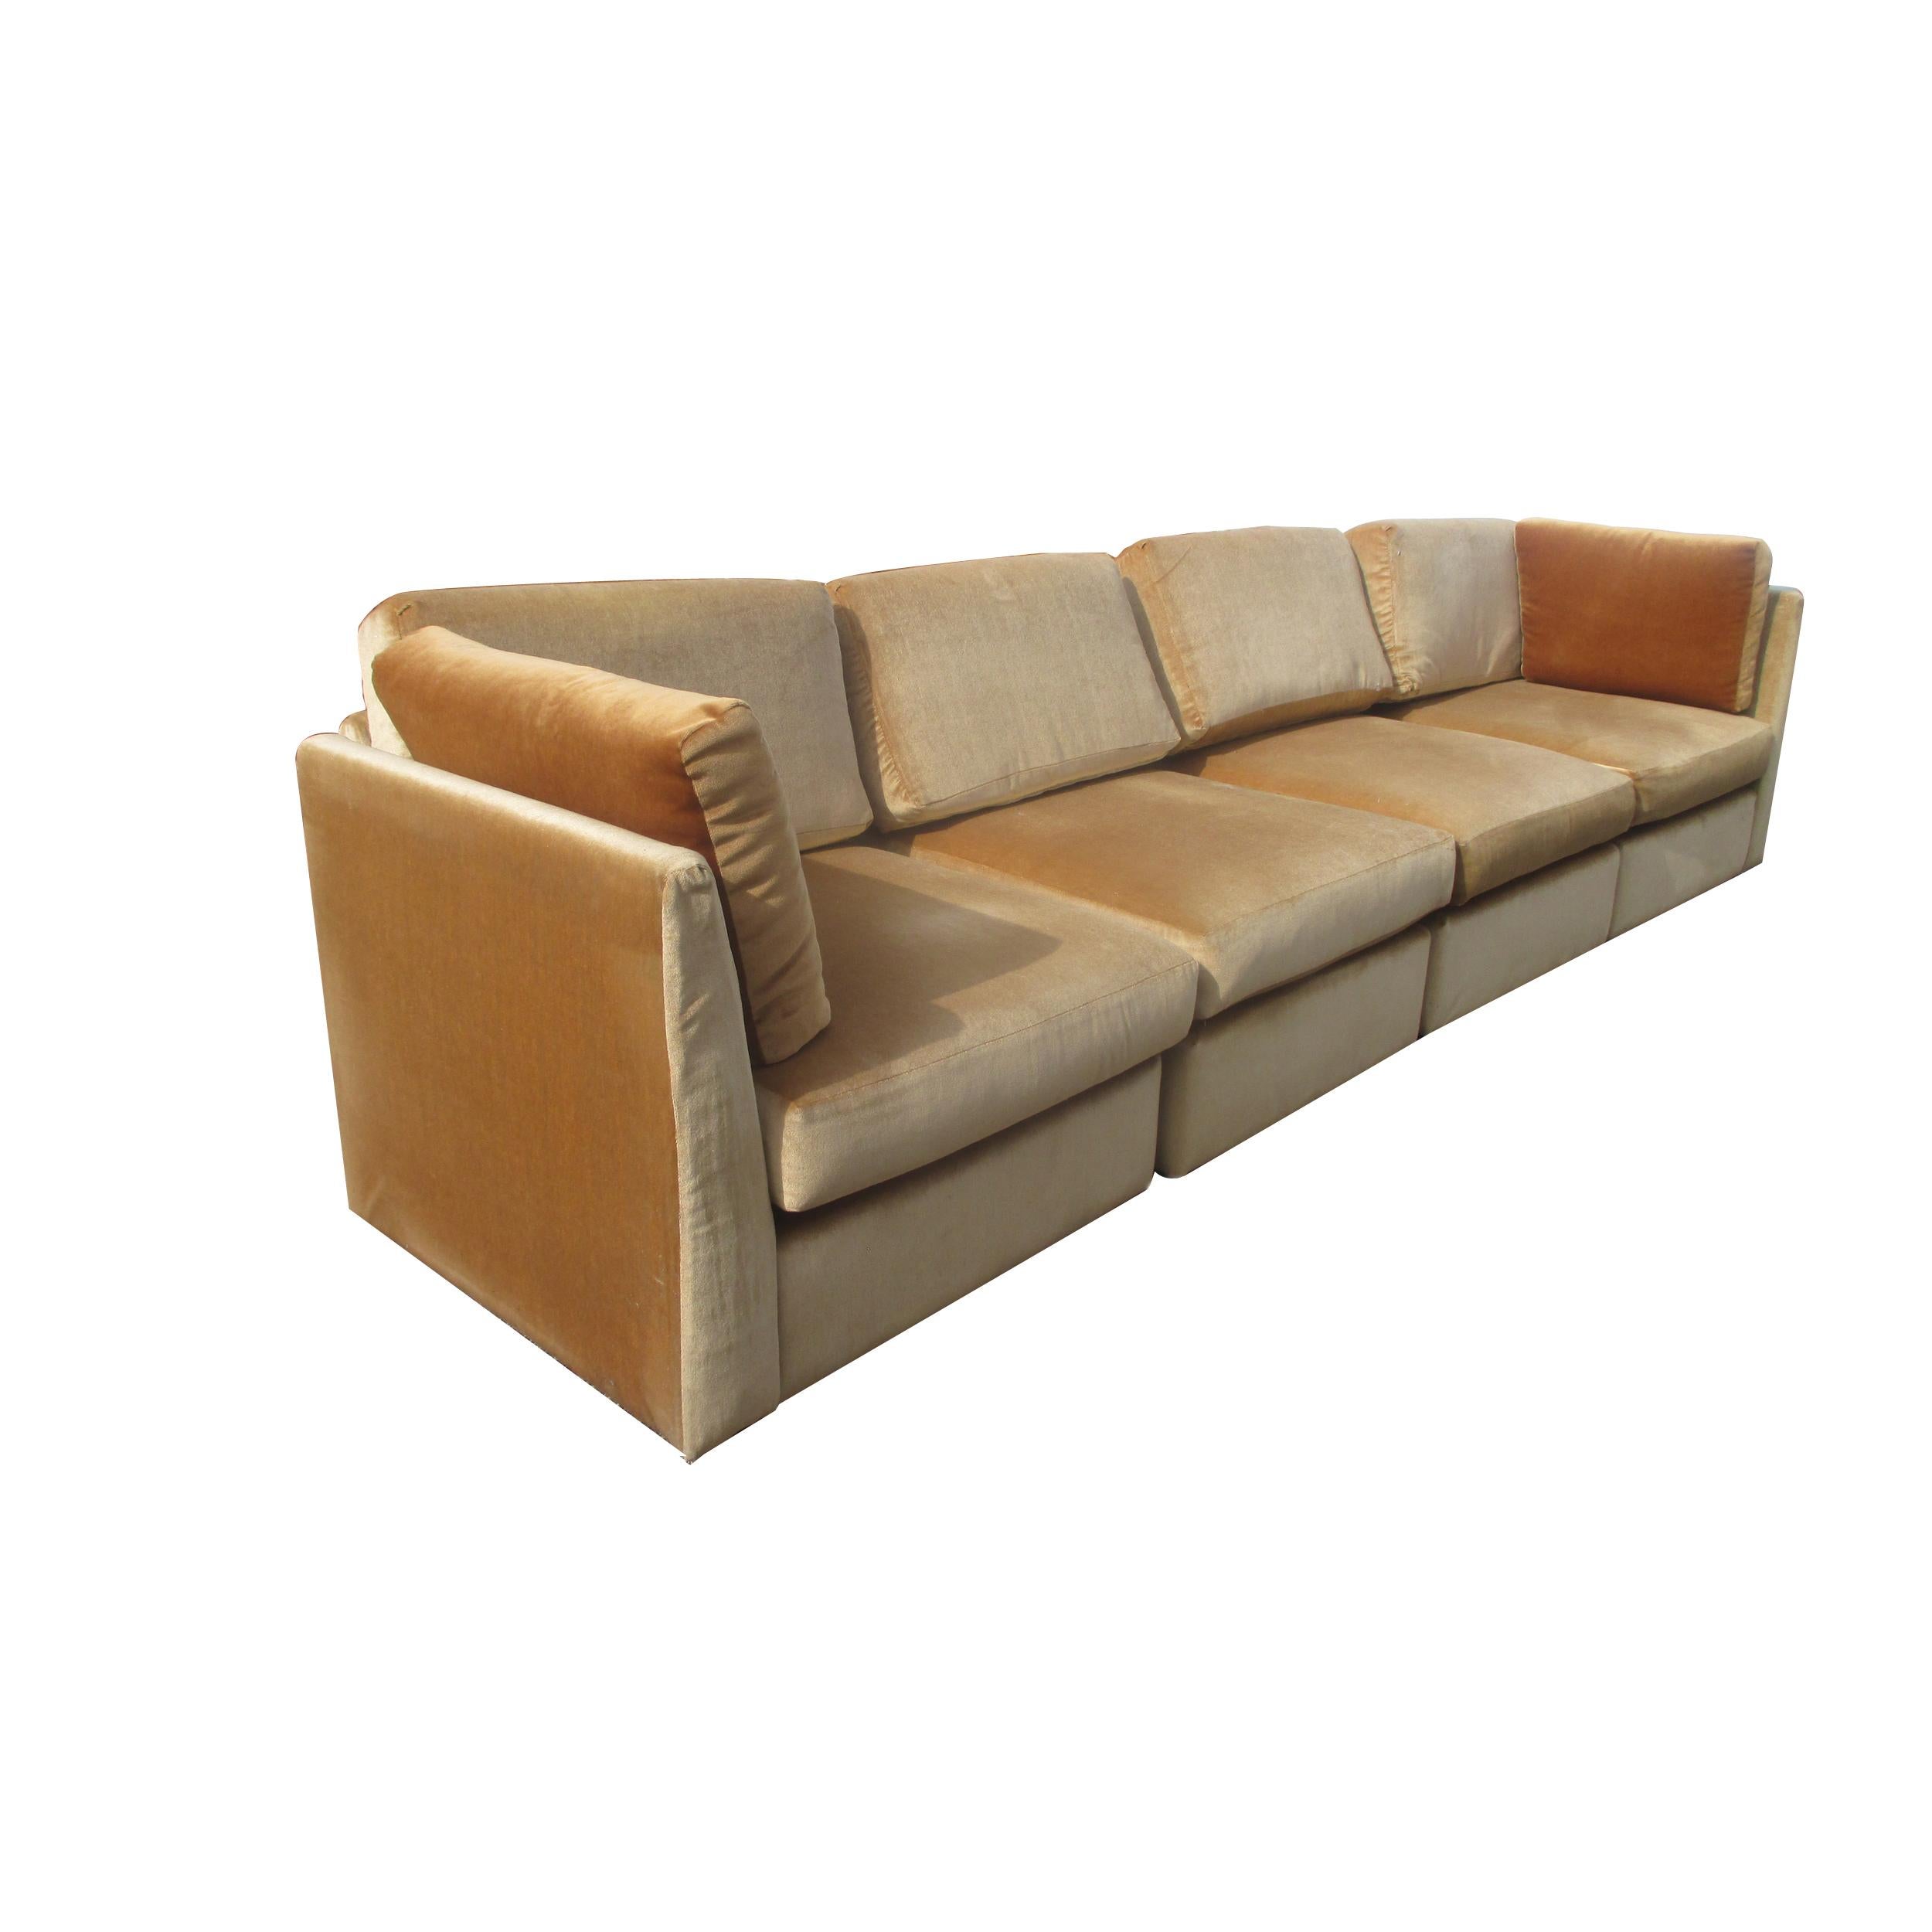 Modern velvet modular sectional sofa

Stunning low profile sofa in rich gold velvet. Modular pieces that can be used apart or as a 120